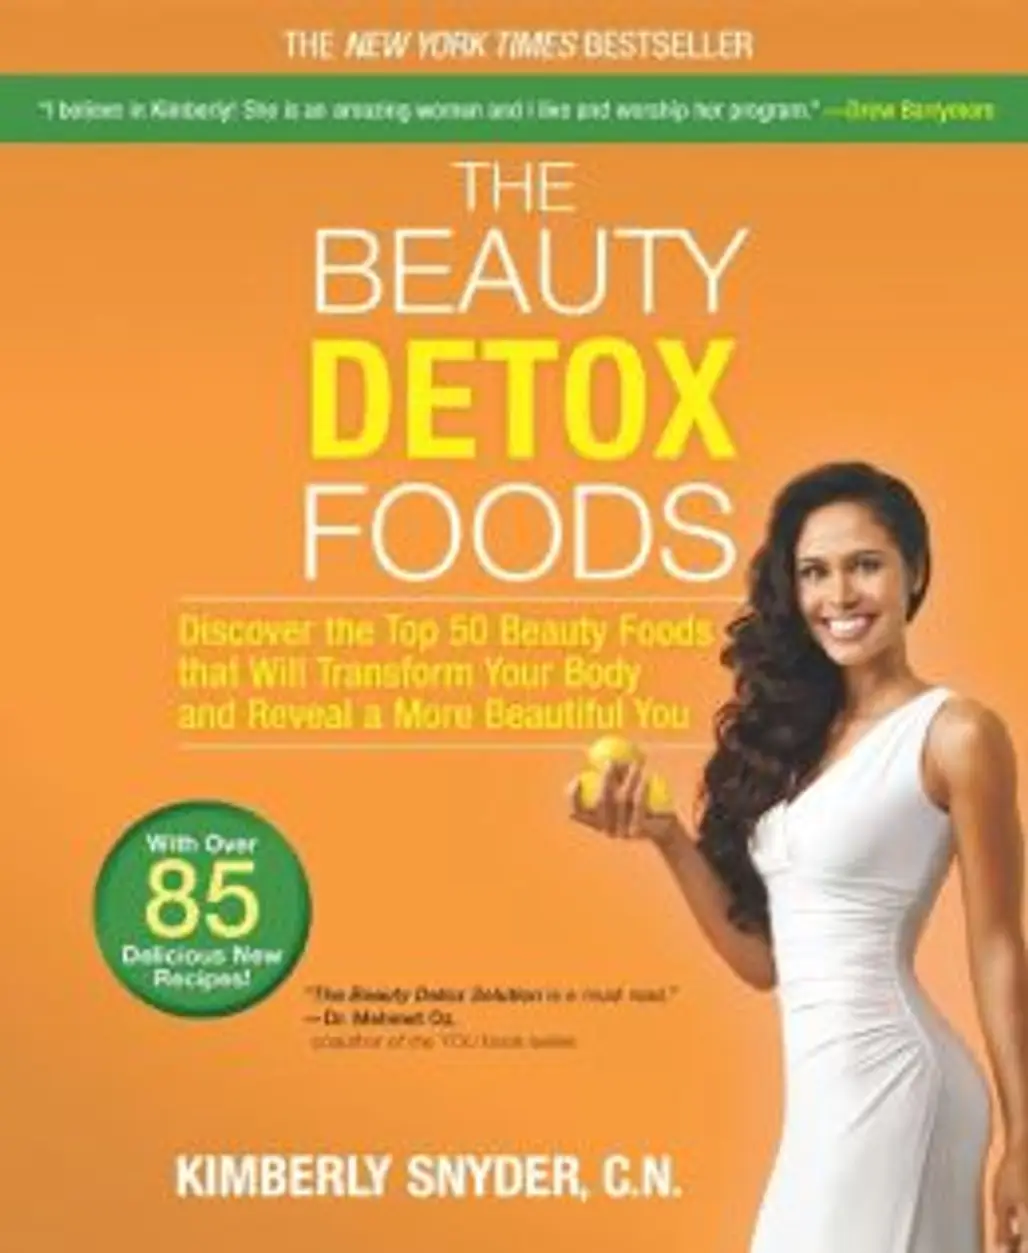 The Beauty Detox Foods: Discover the Top 50 Beauty Foods That Will Transform Your Body and Reveal a More Beautiful You by Kimberly Snyder